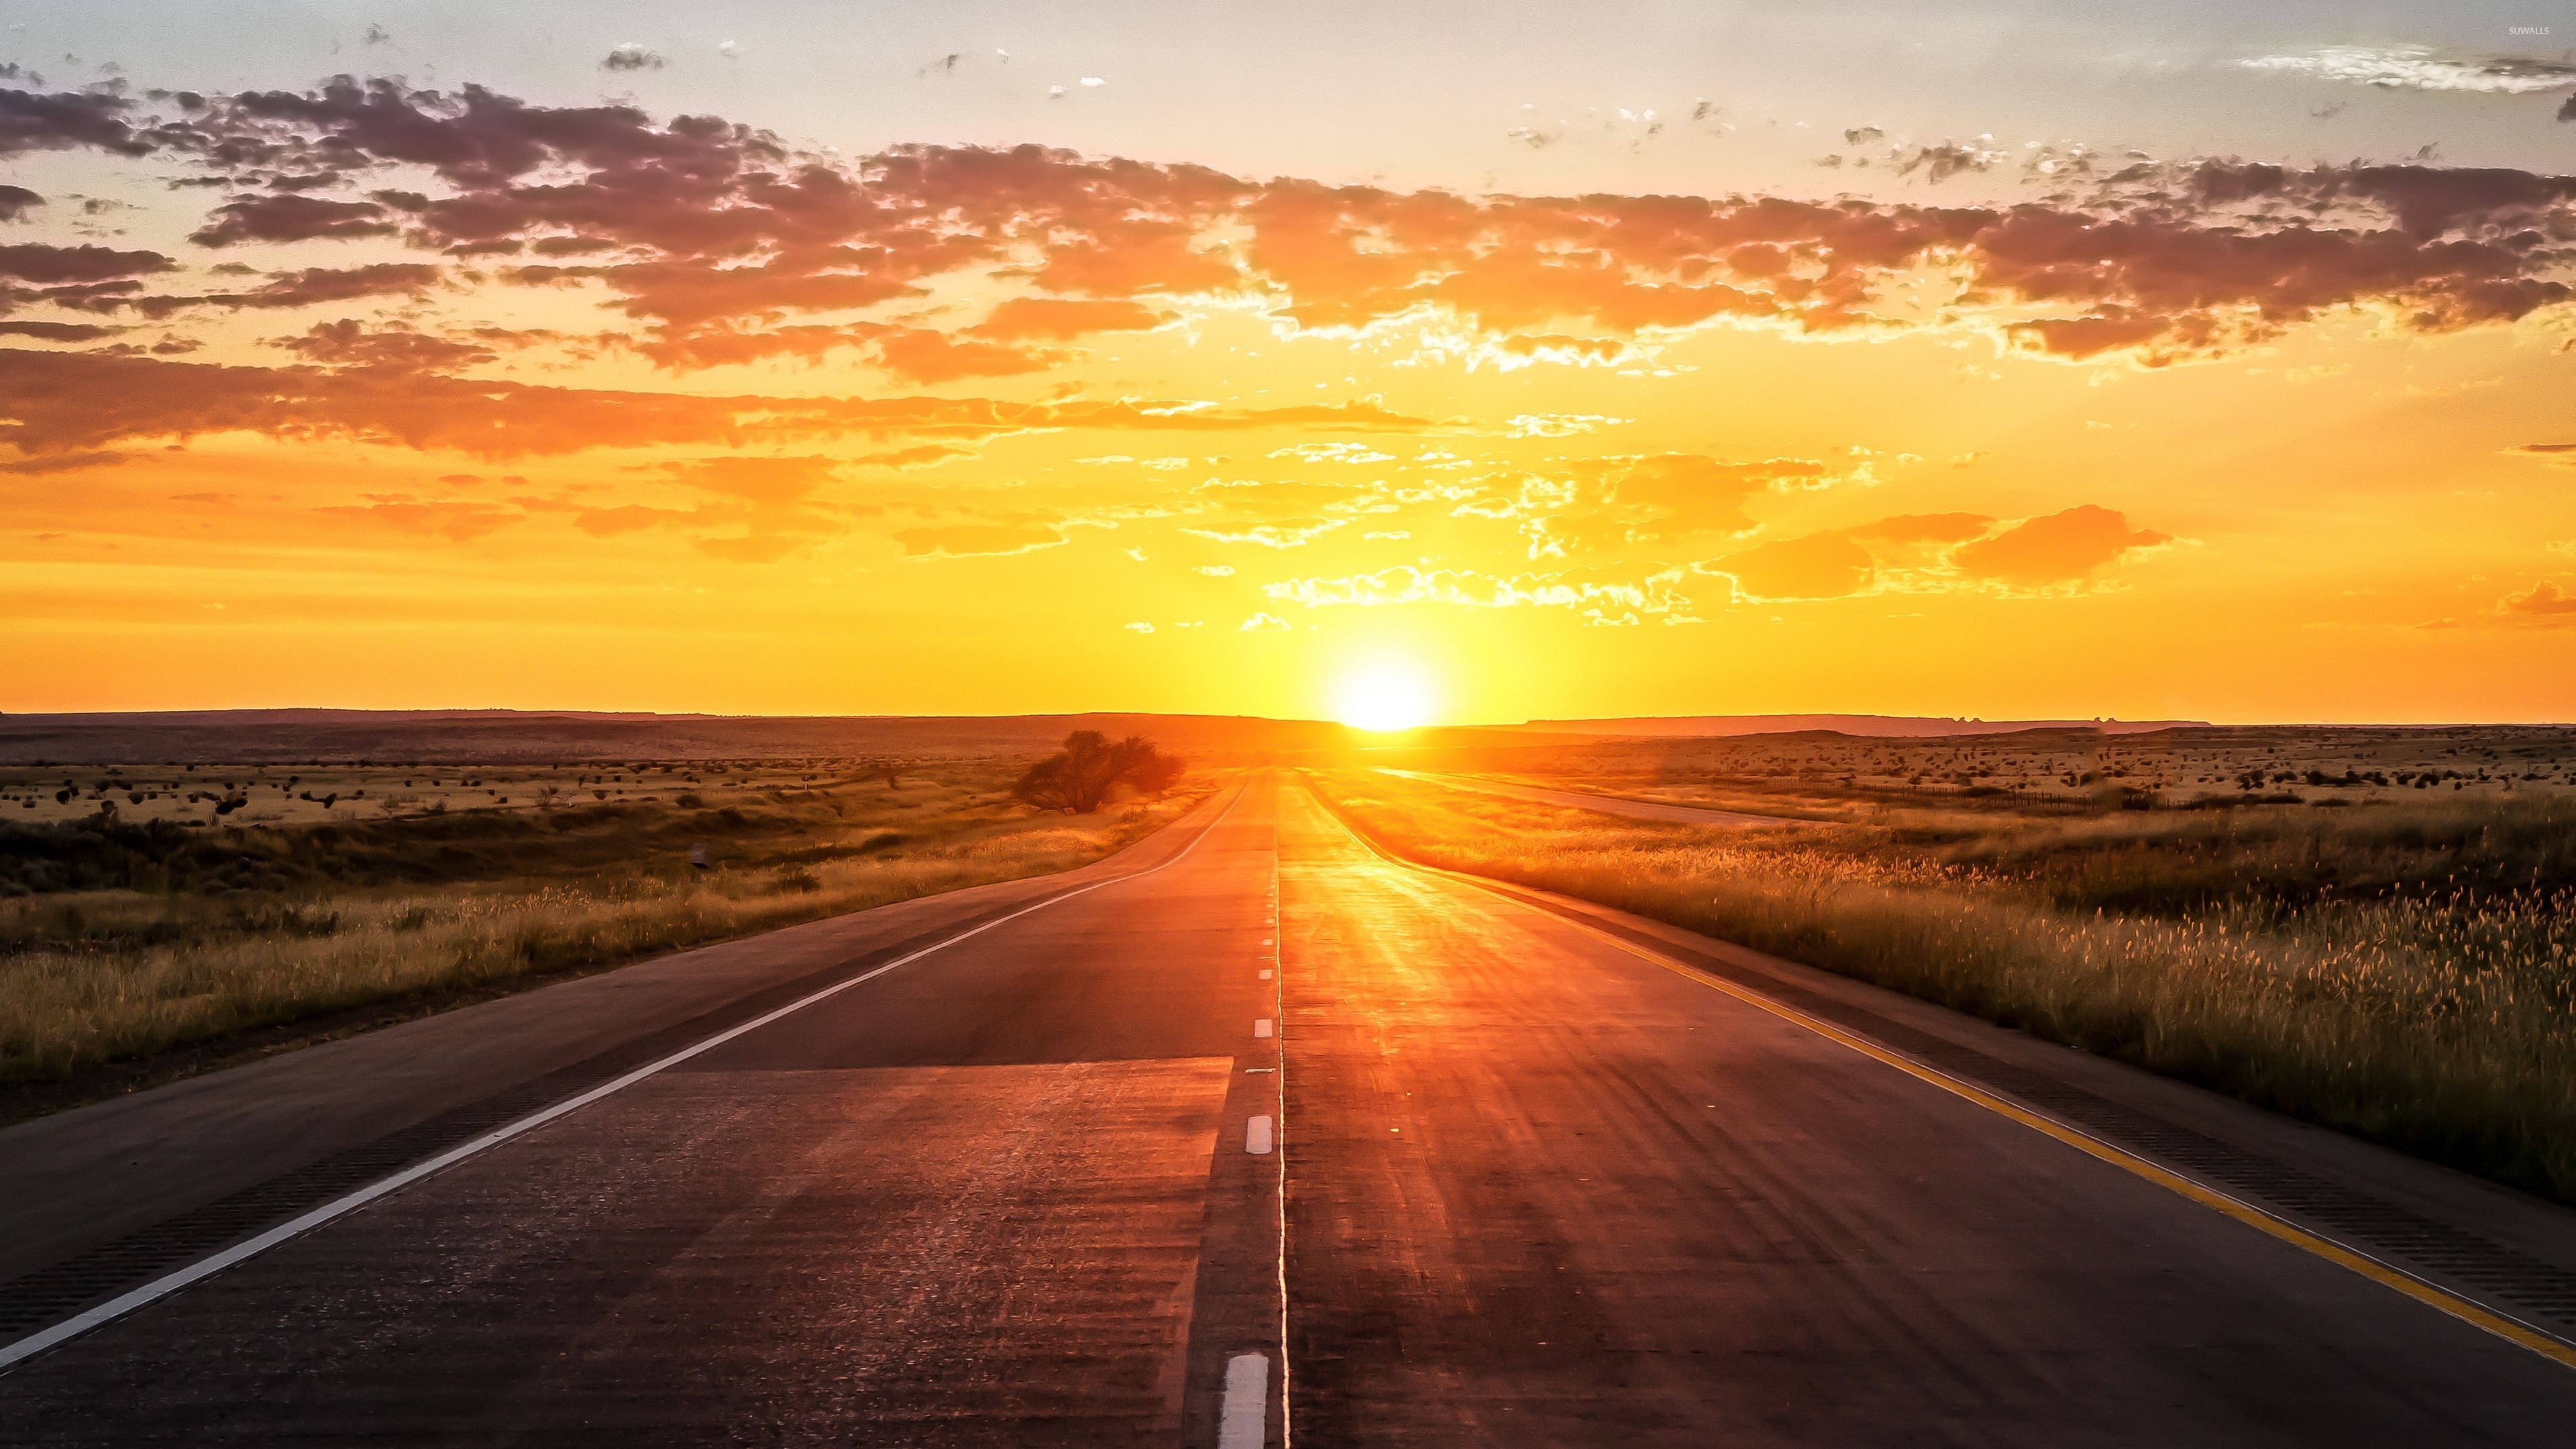 Road towards the golden sunset wallpaper - Nature wallpapers - #46454